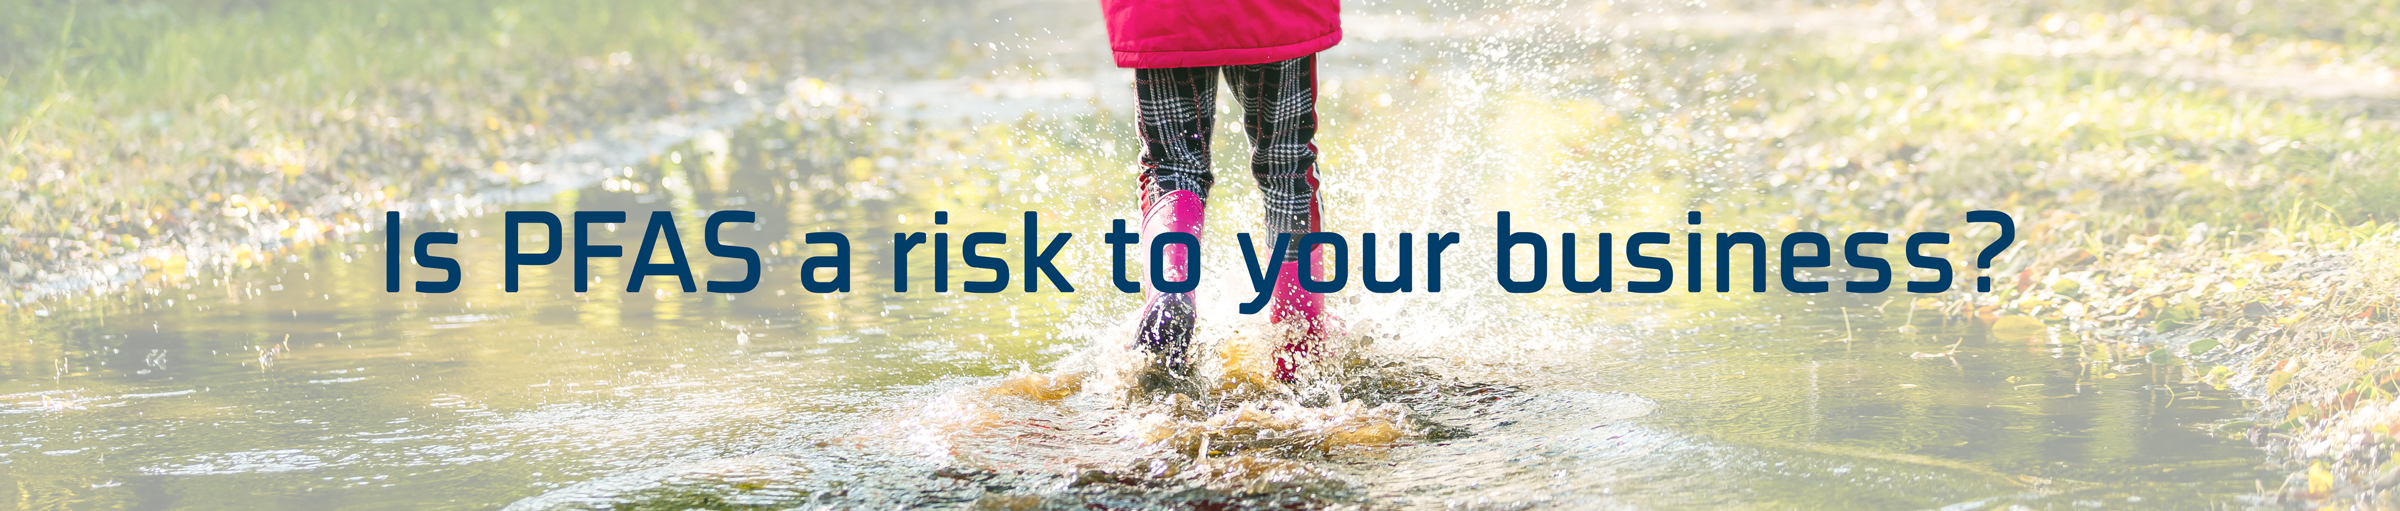 Is PFAS a risk to your business?